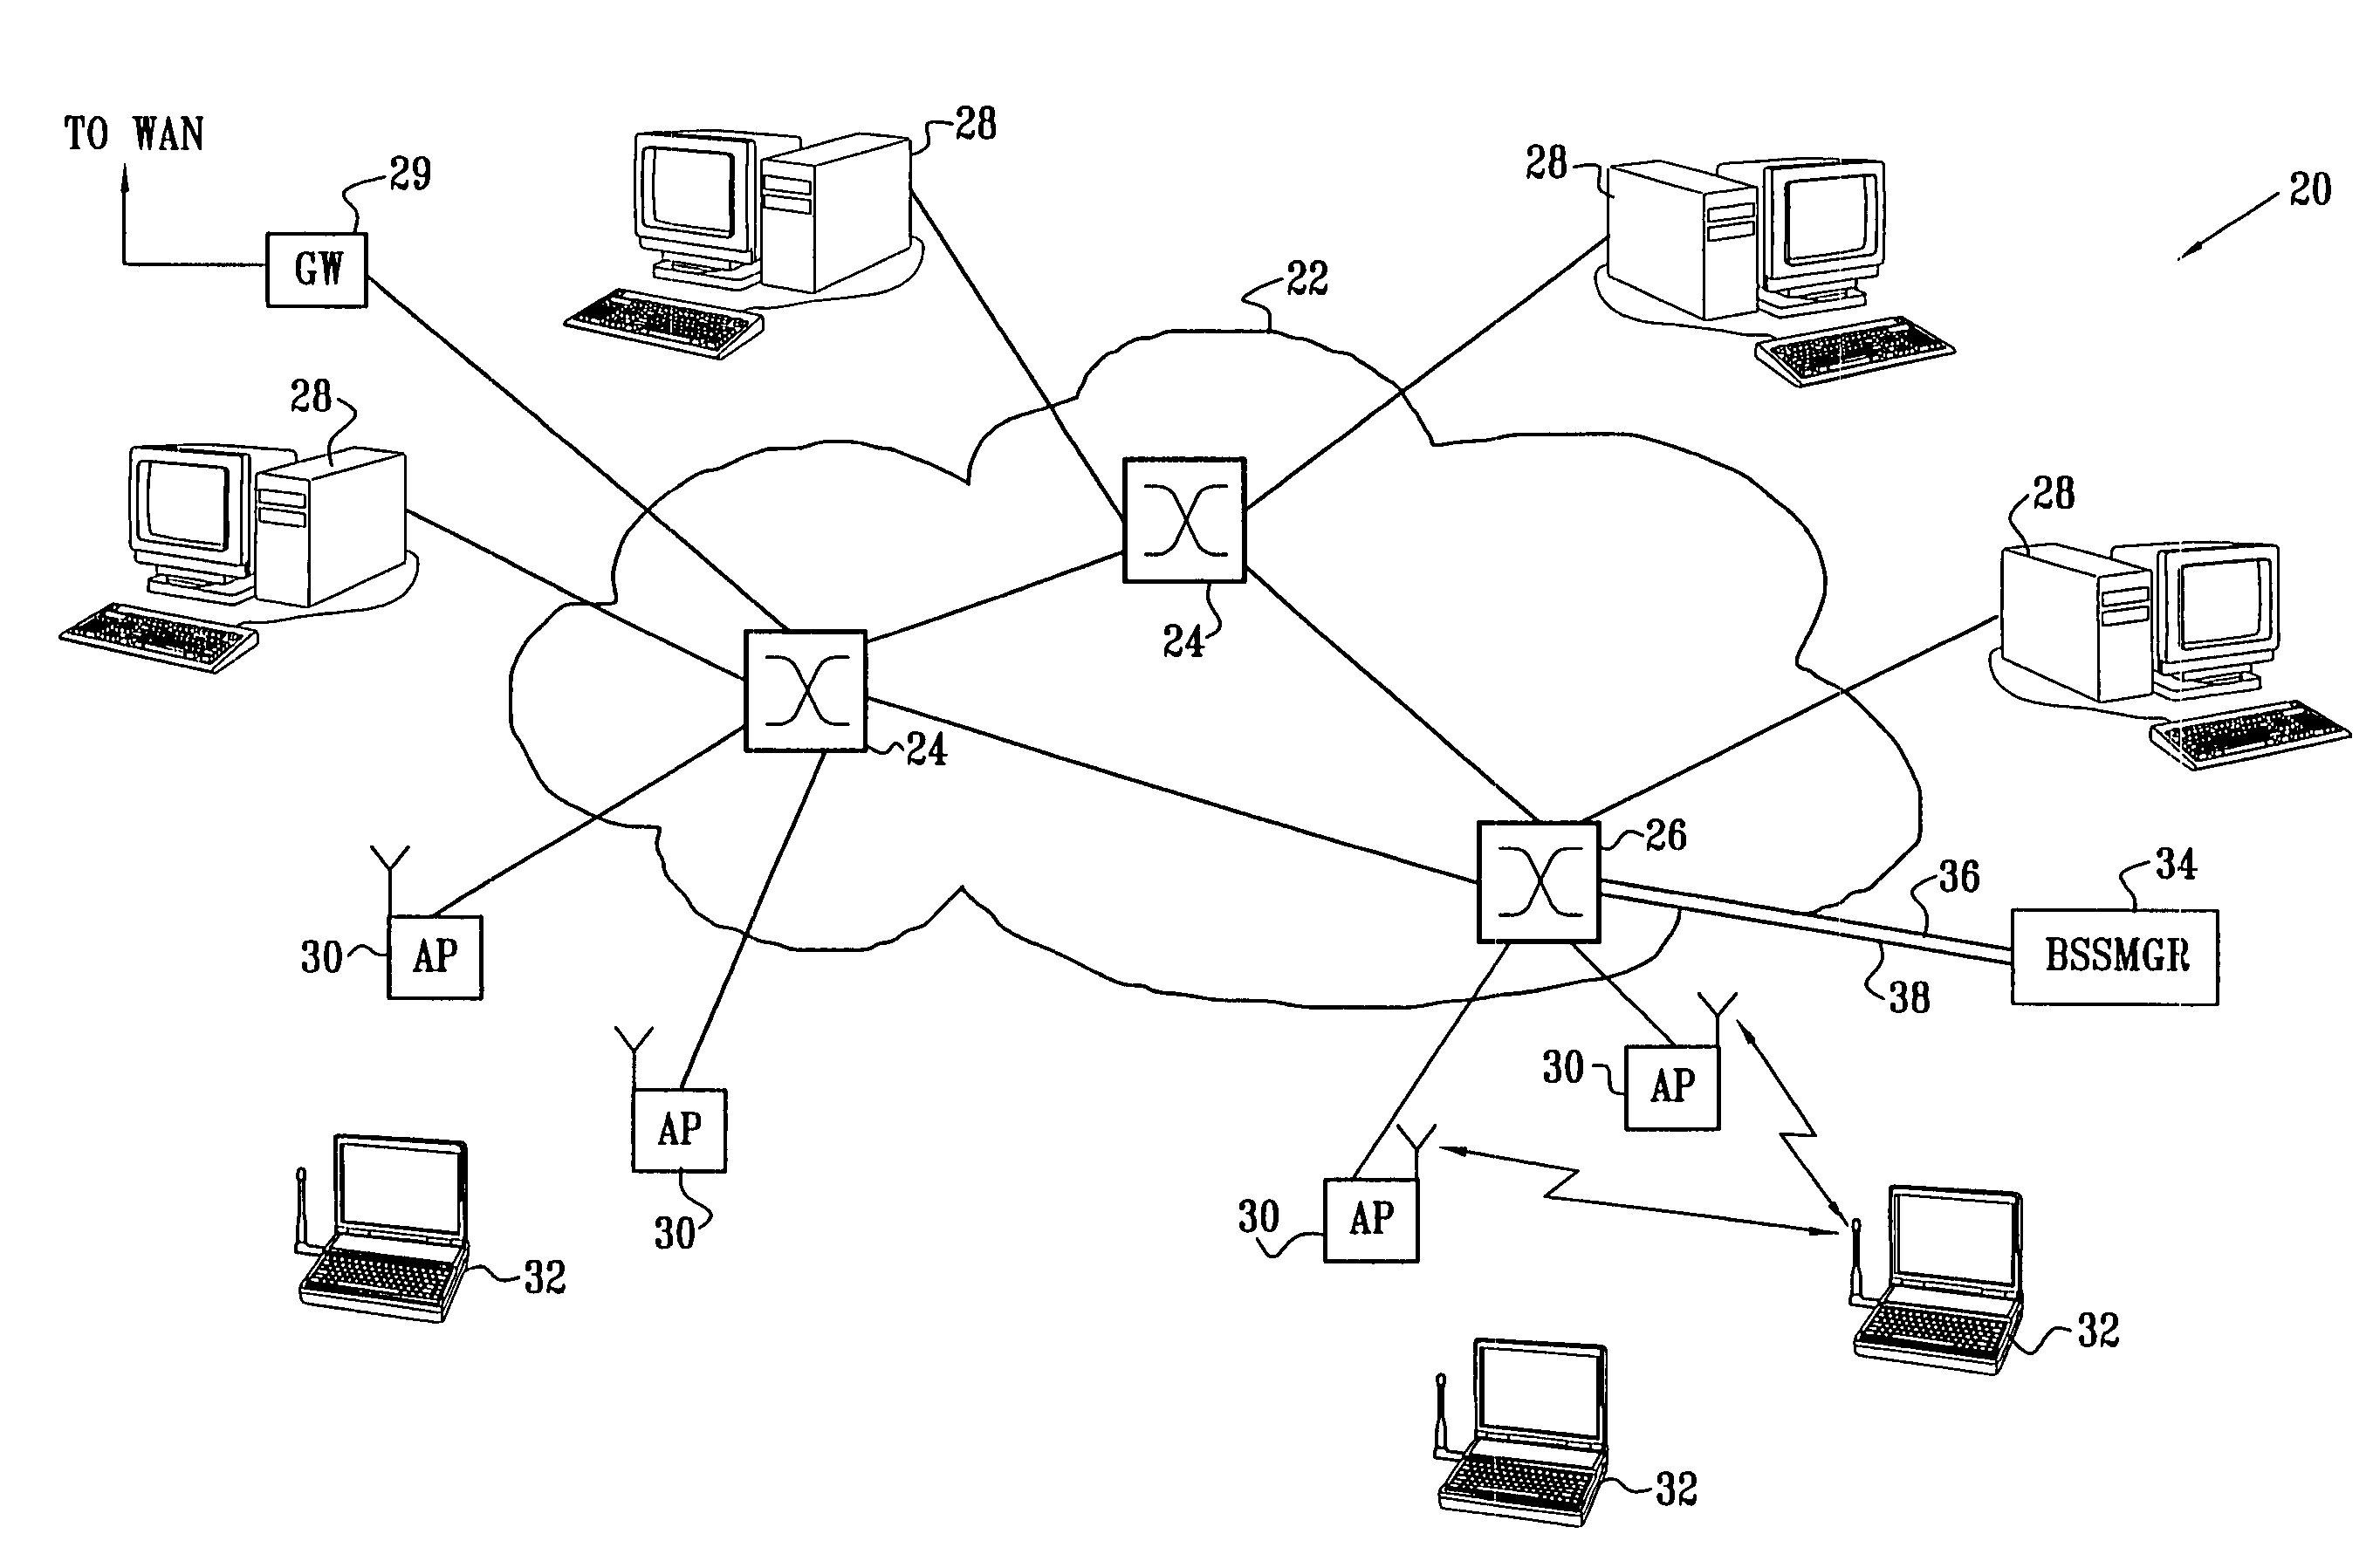 Wireless LAN control over a wired network